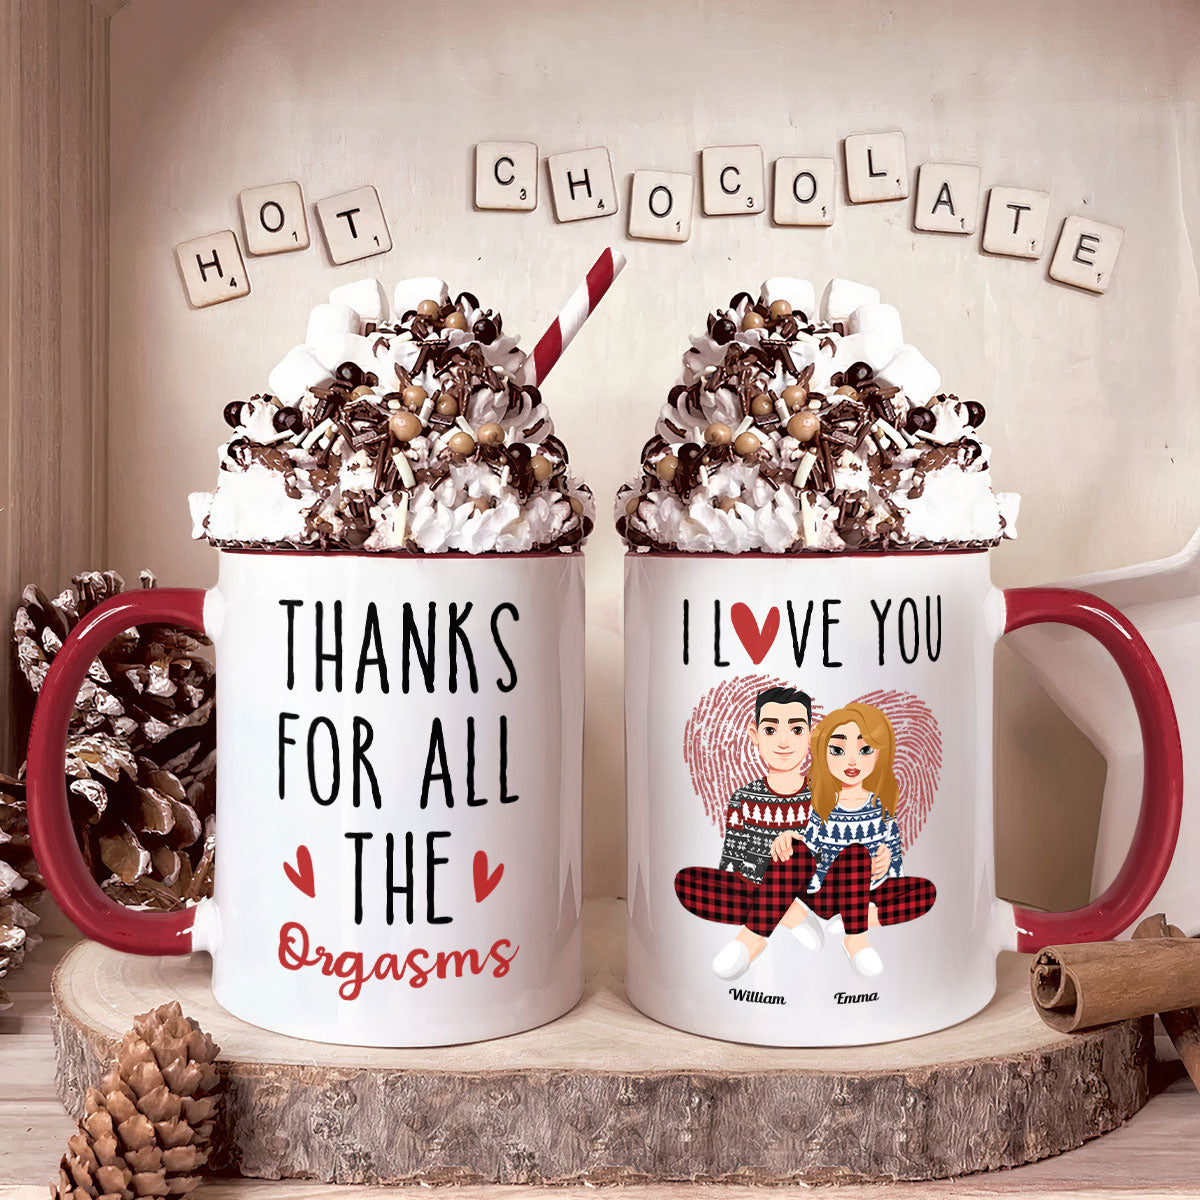 Thanks For All The Orgasms - Personalized Accent Mug